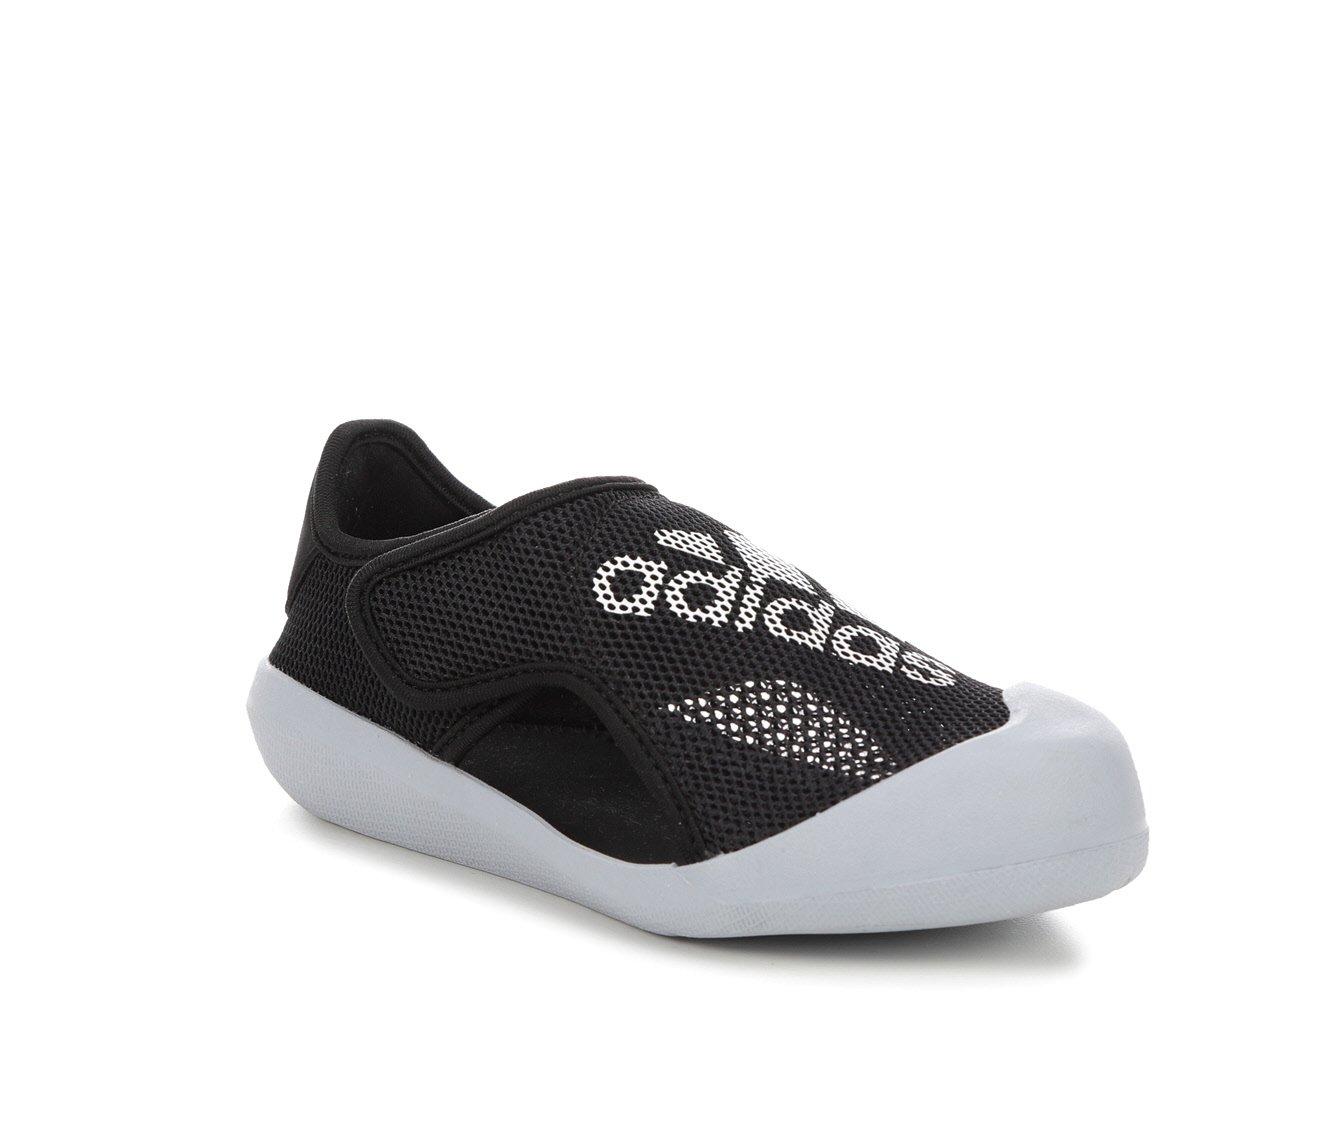 Boys' Adidas Toddler & Little Kid Altaventure Water Shoes | Shoe Carnival